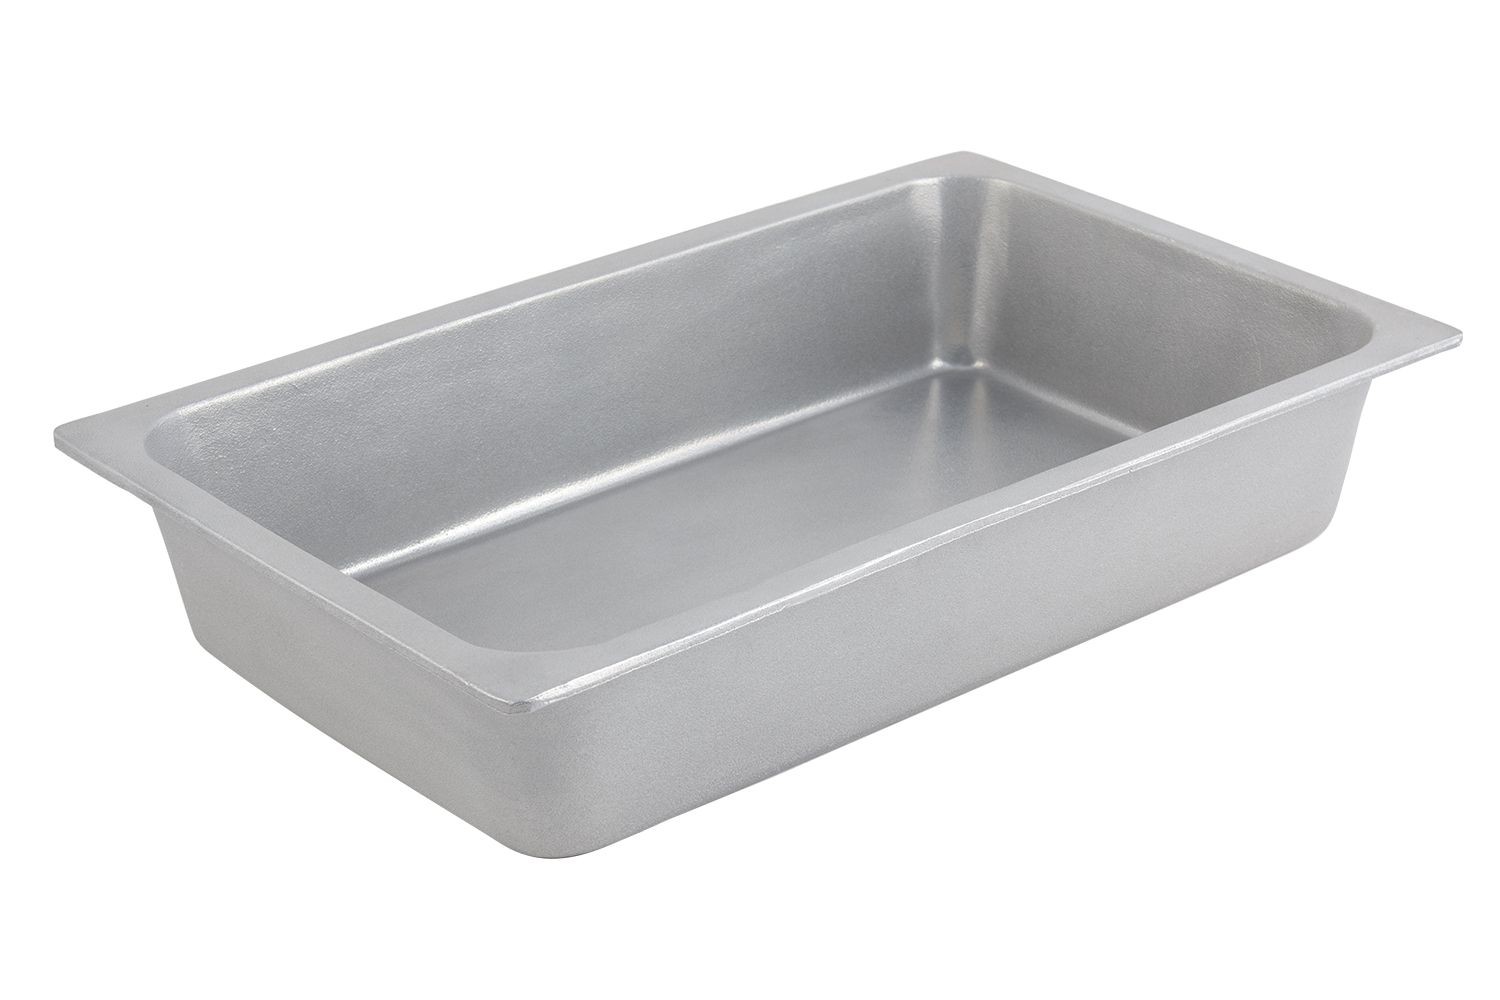 Bon Chef 5070P Full-Size Chafer Food Pan, Pewter Glo 4" Deep